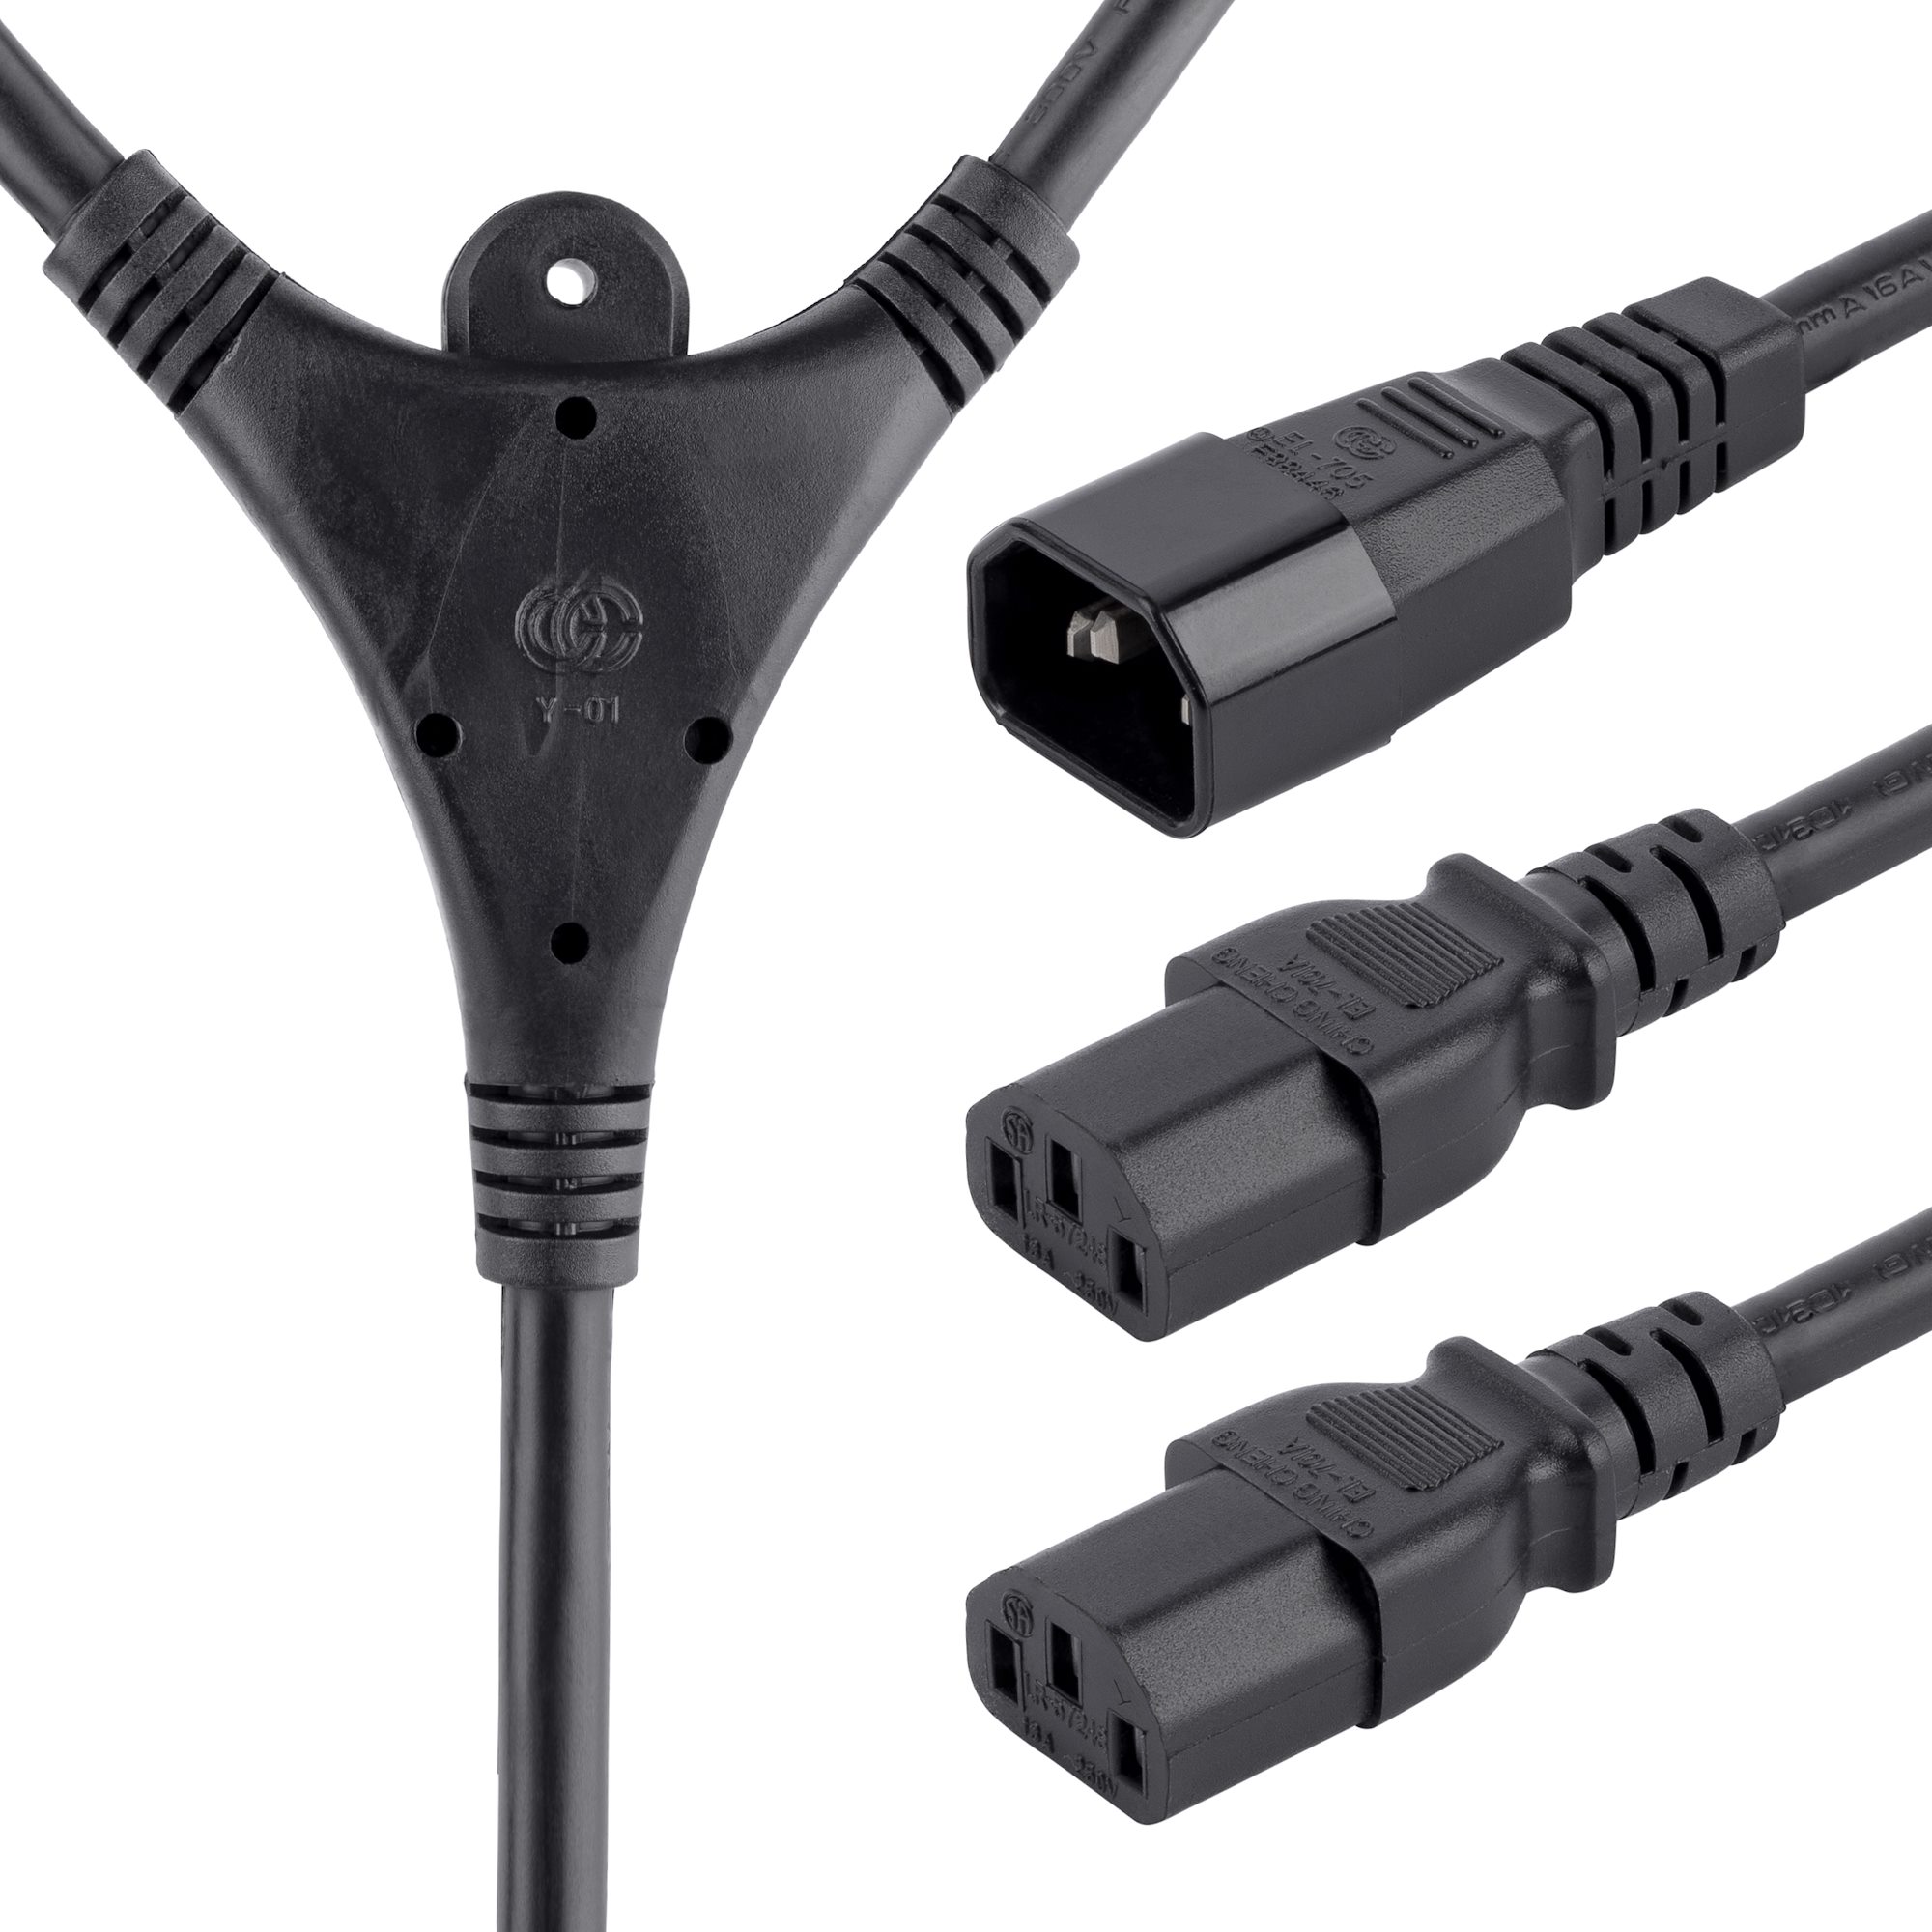 10ft Power Extension Cord C14 to 2x C13 - Computer Power Cables - External, Cables